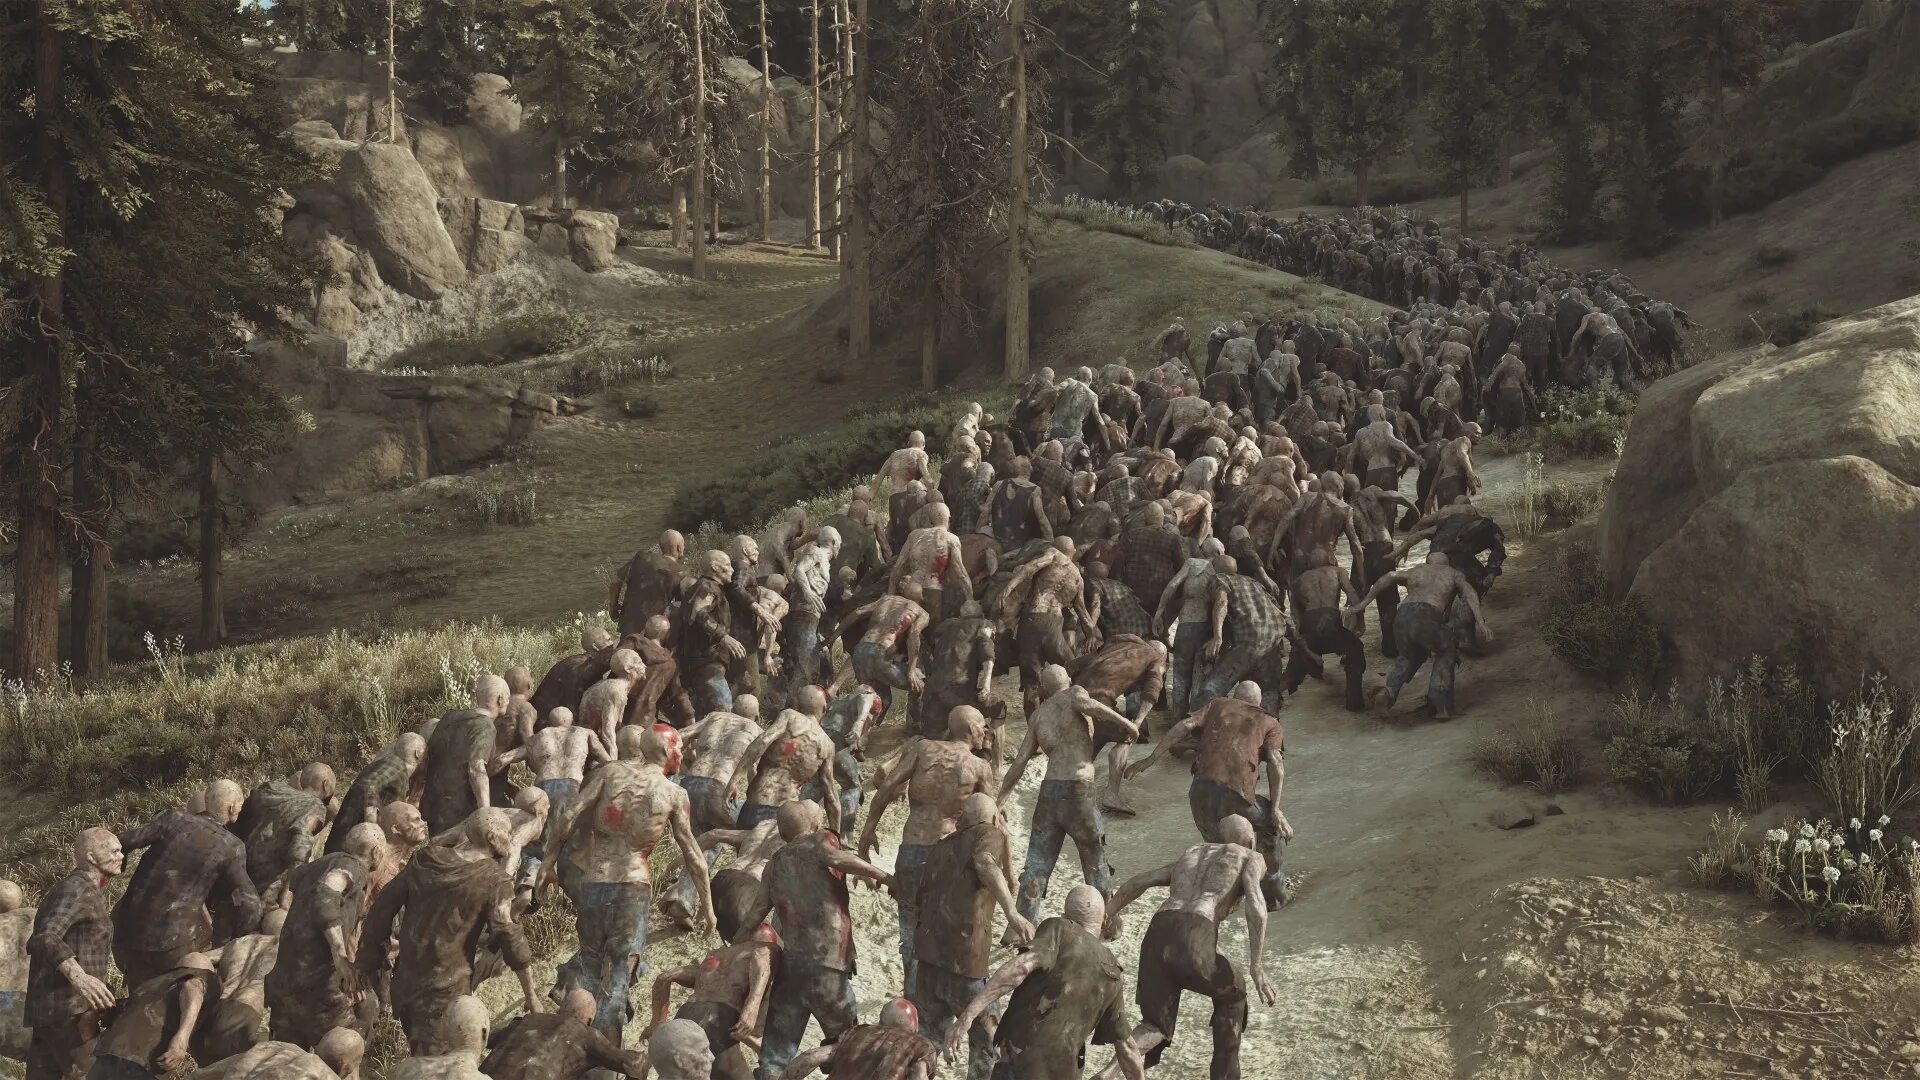 They did not the game. Days gone (жизнь после) (ps4).